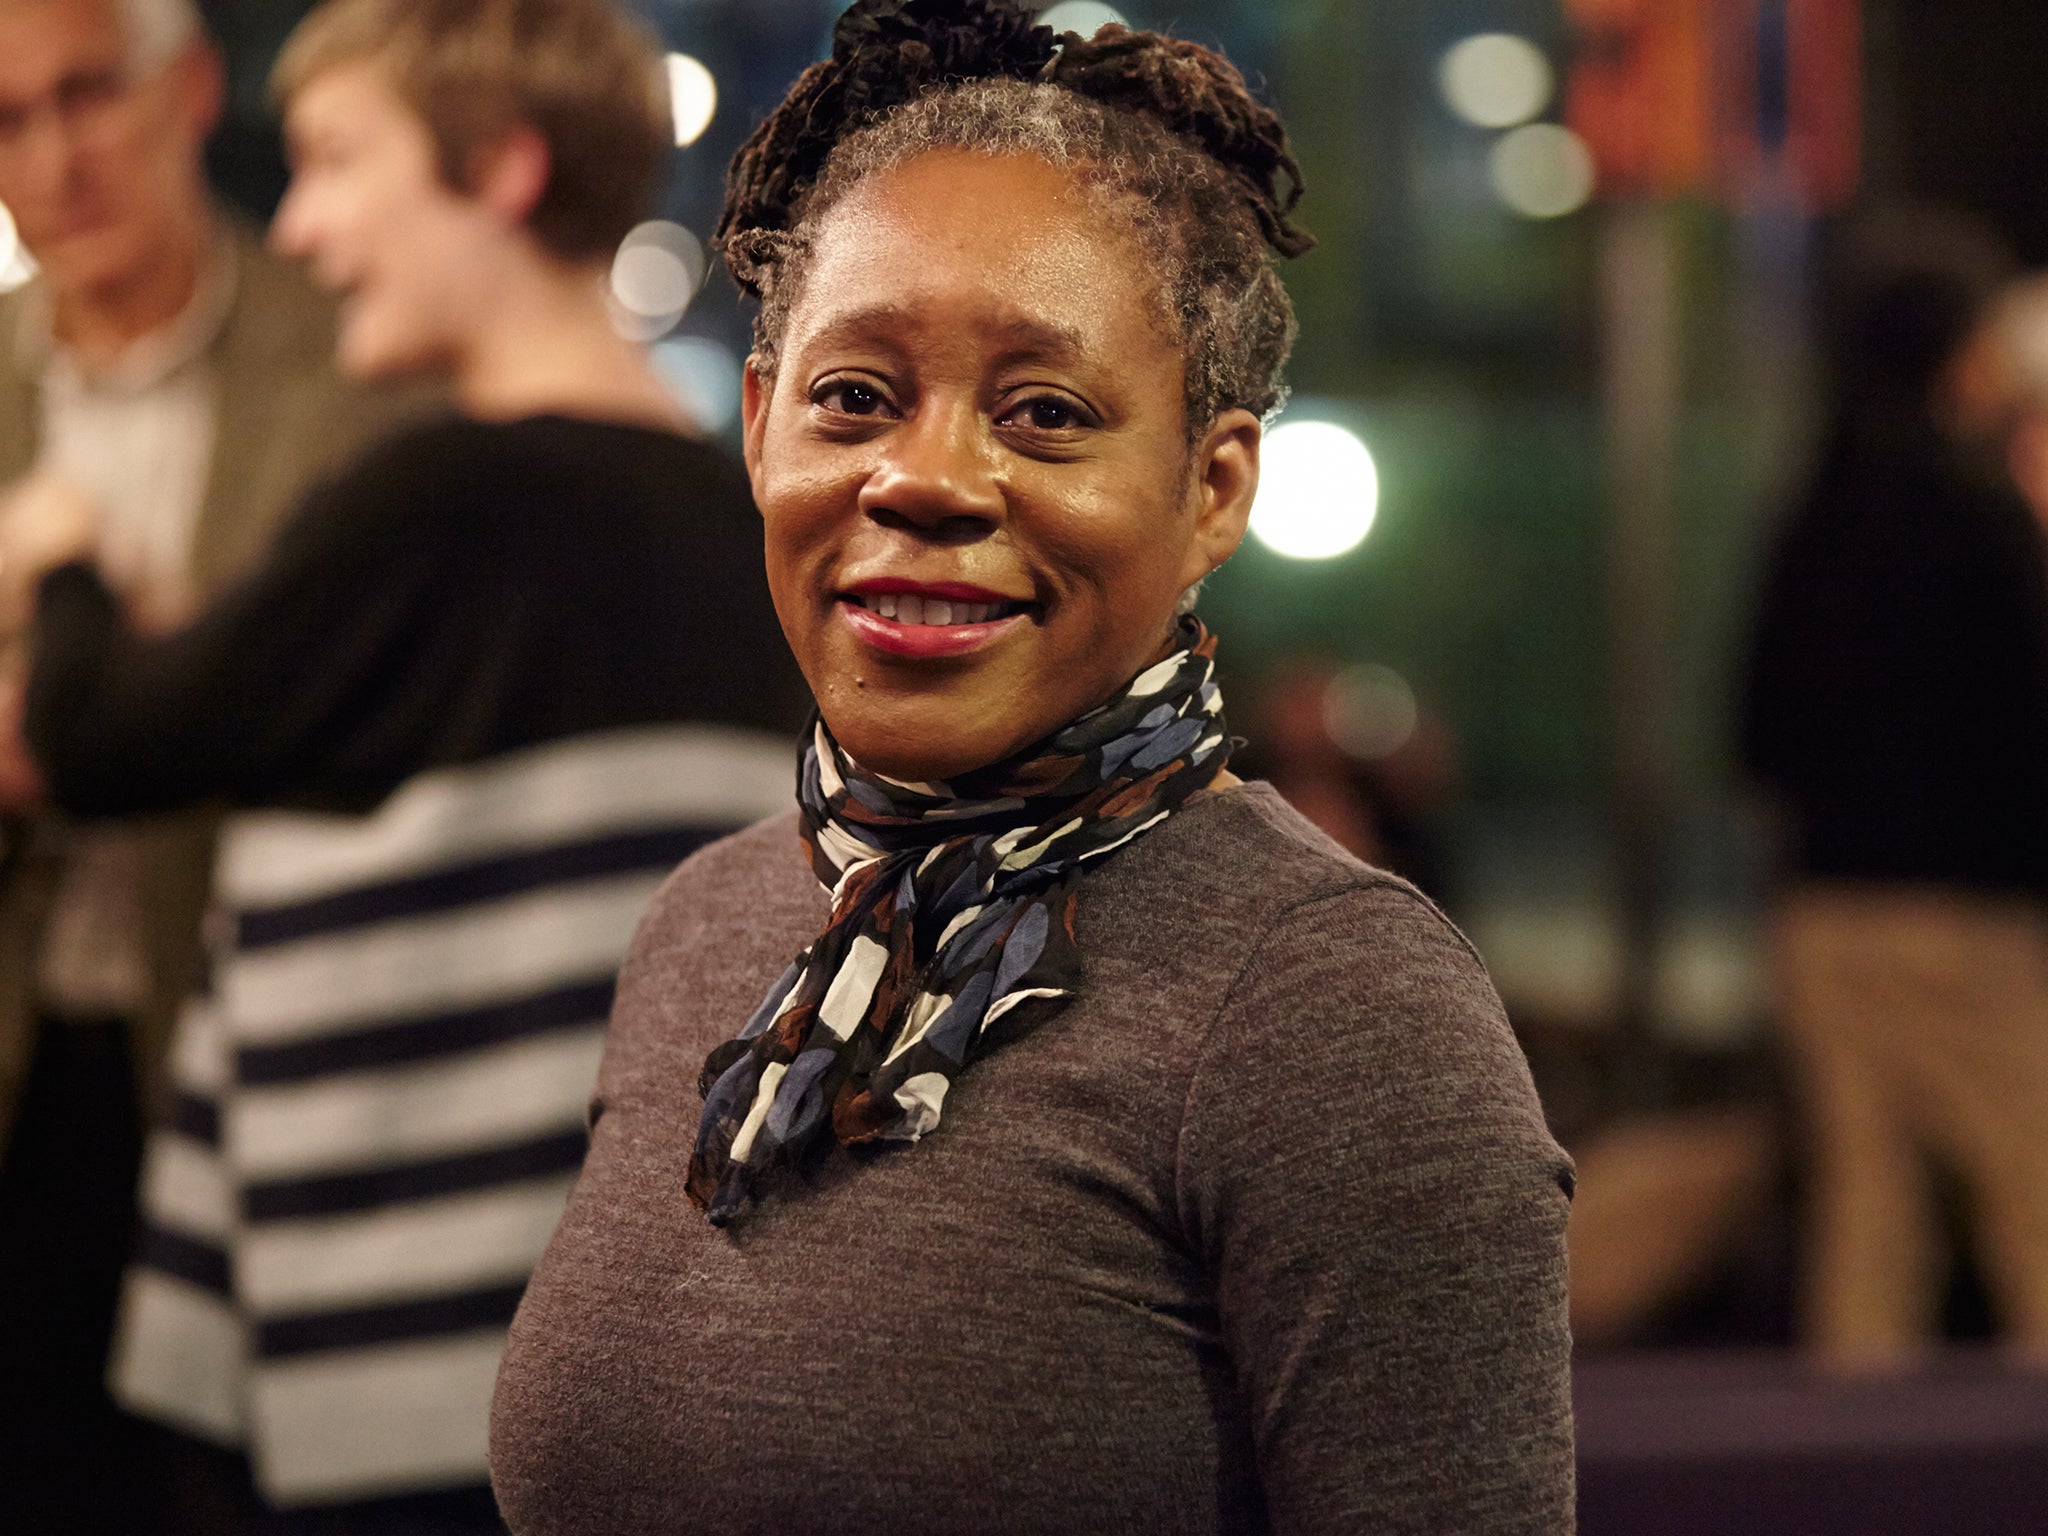 Professor Sonia Boyce is the joint chair of black art and design at the University of the Arts London